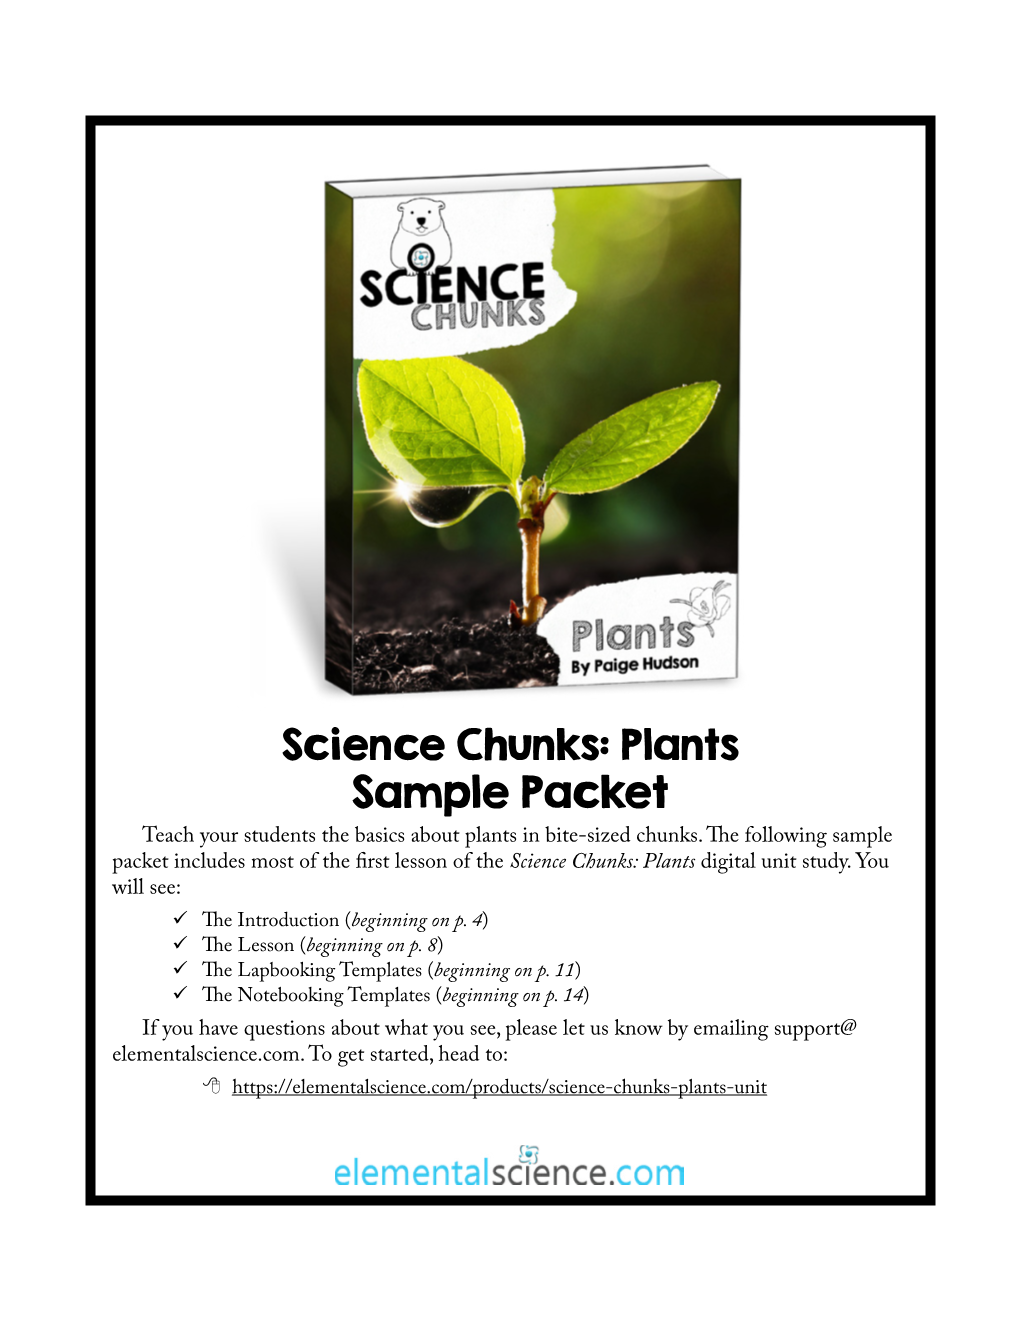 Science Chunks: Plants Sample Packet Teach Your Students the Basics About Plants in Bite-Sized Chunks